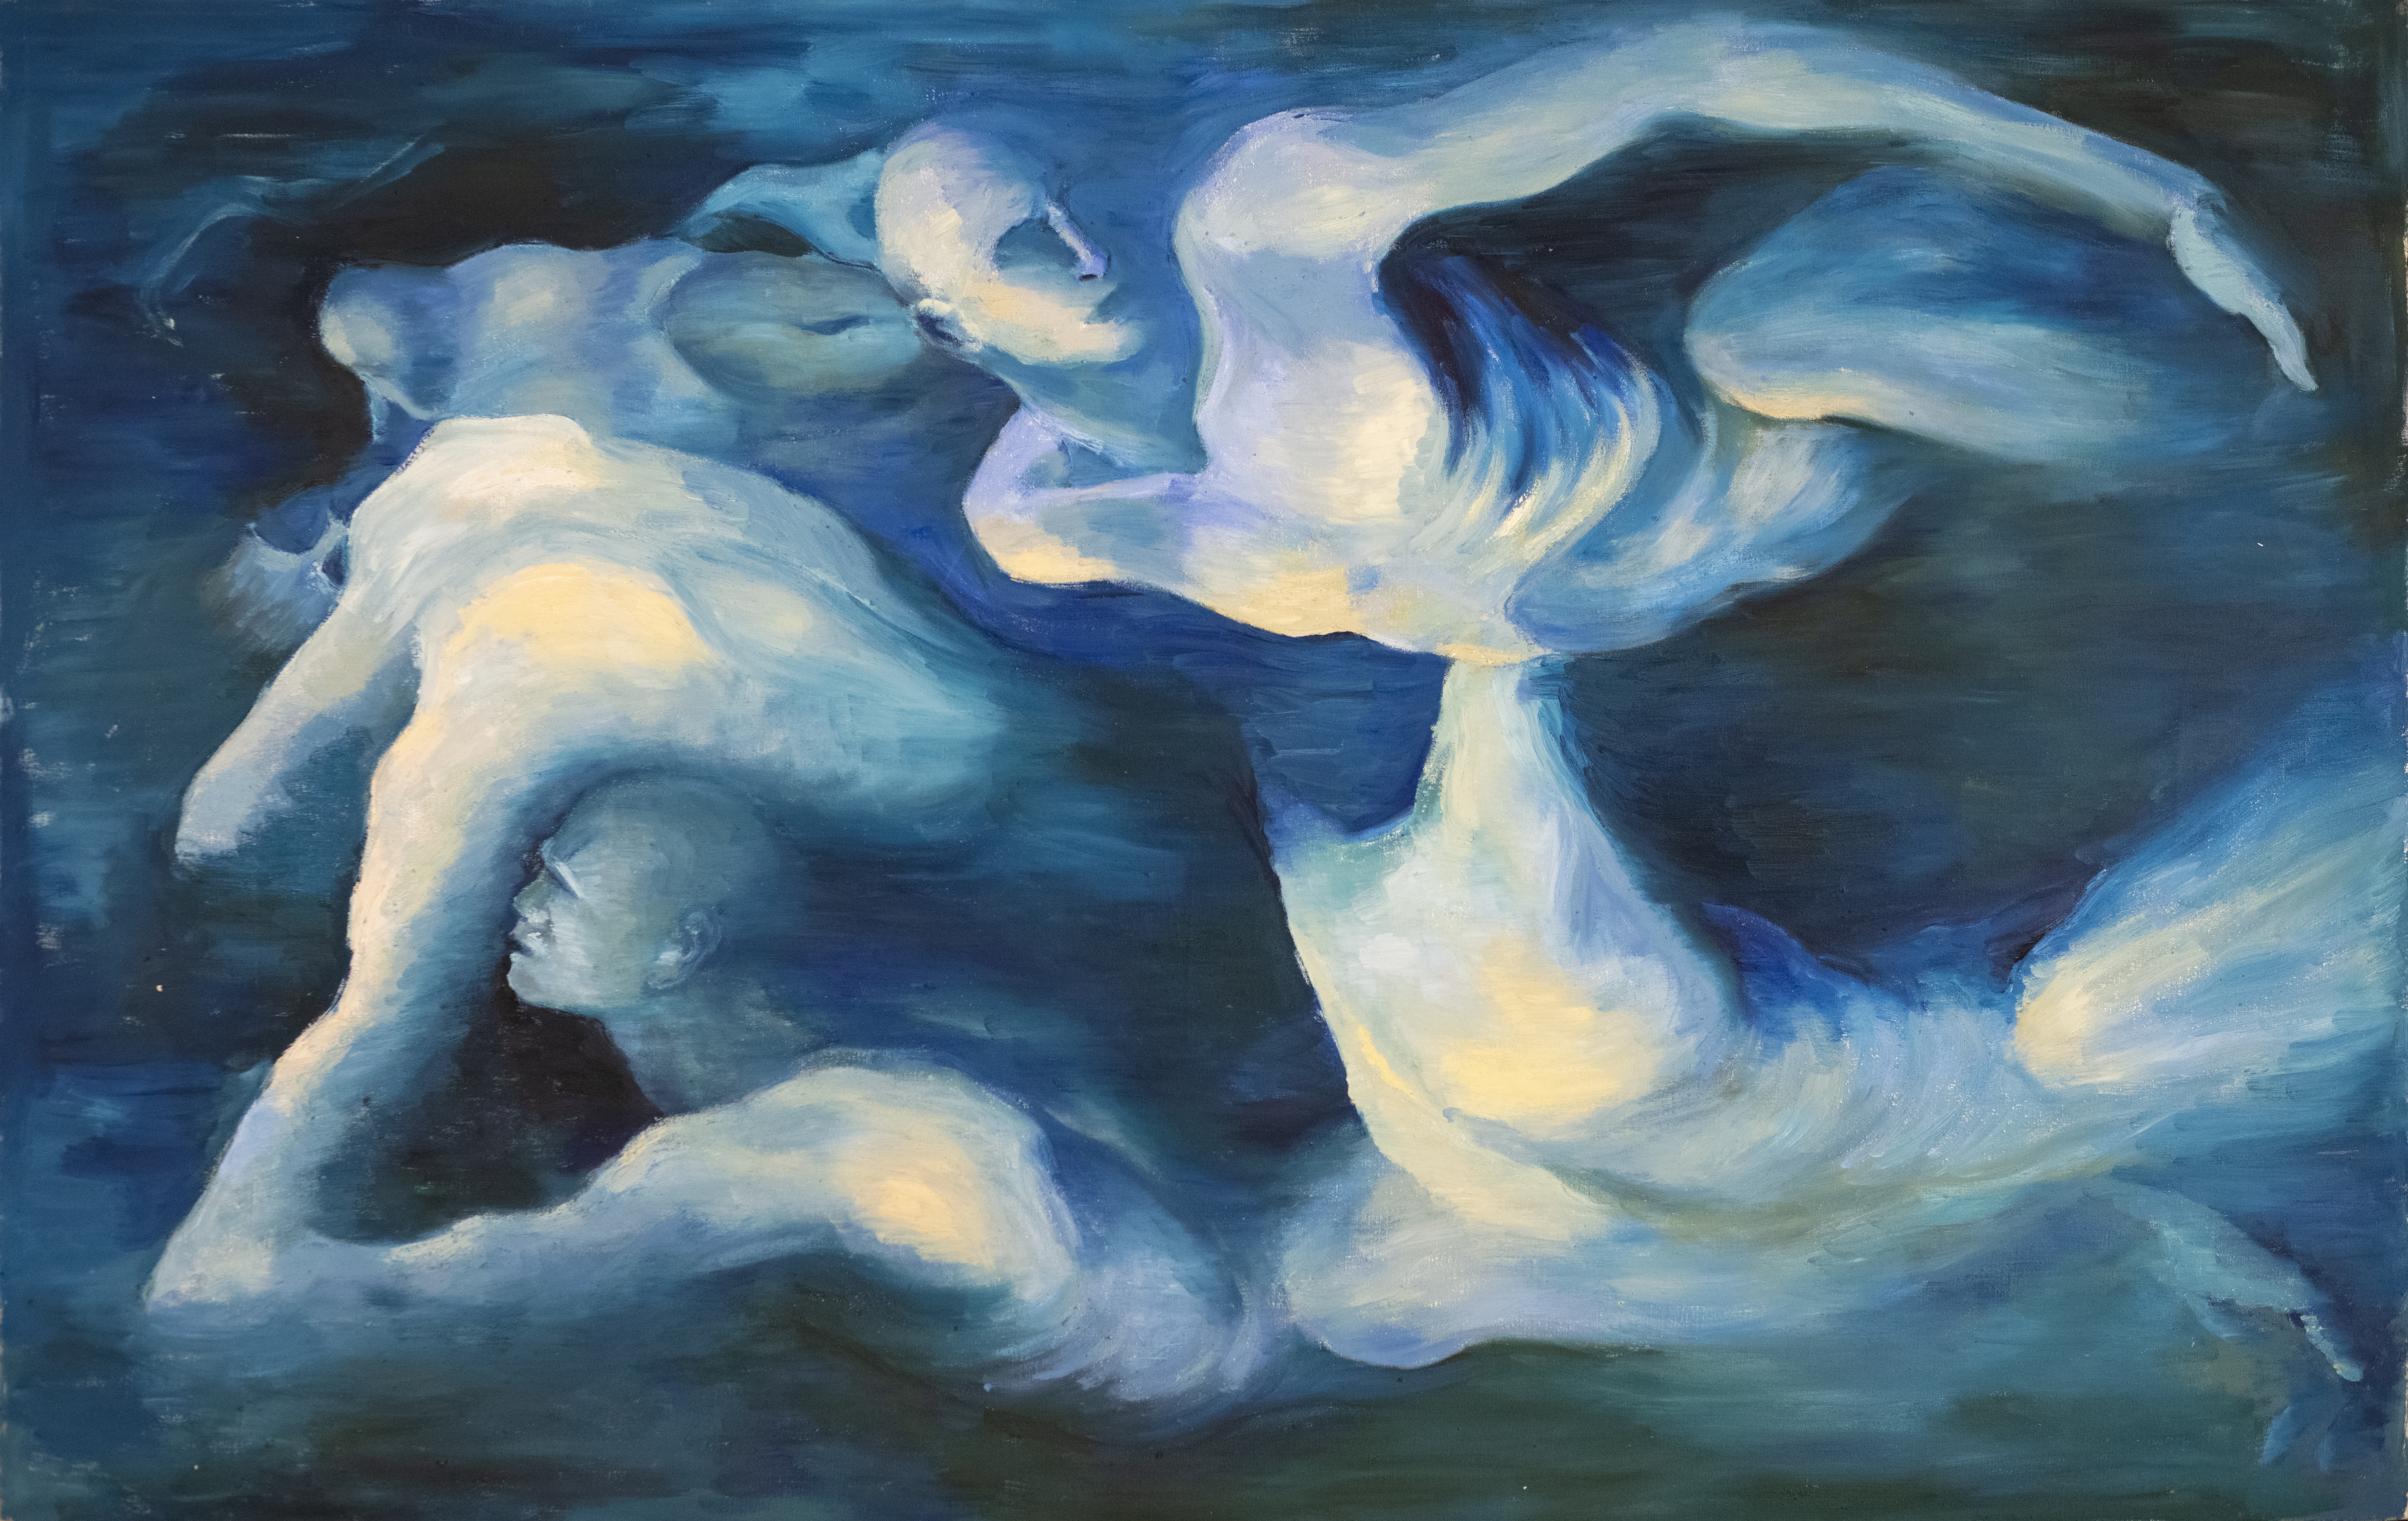 Abstract human figures float like clouds on a dark background.